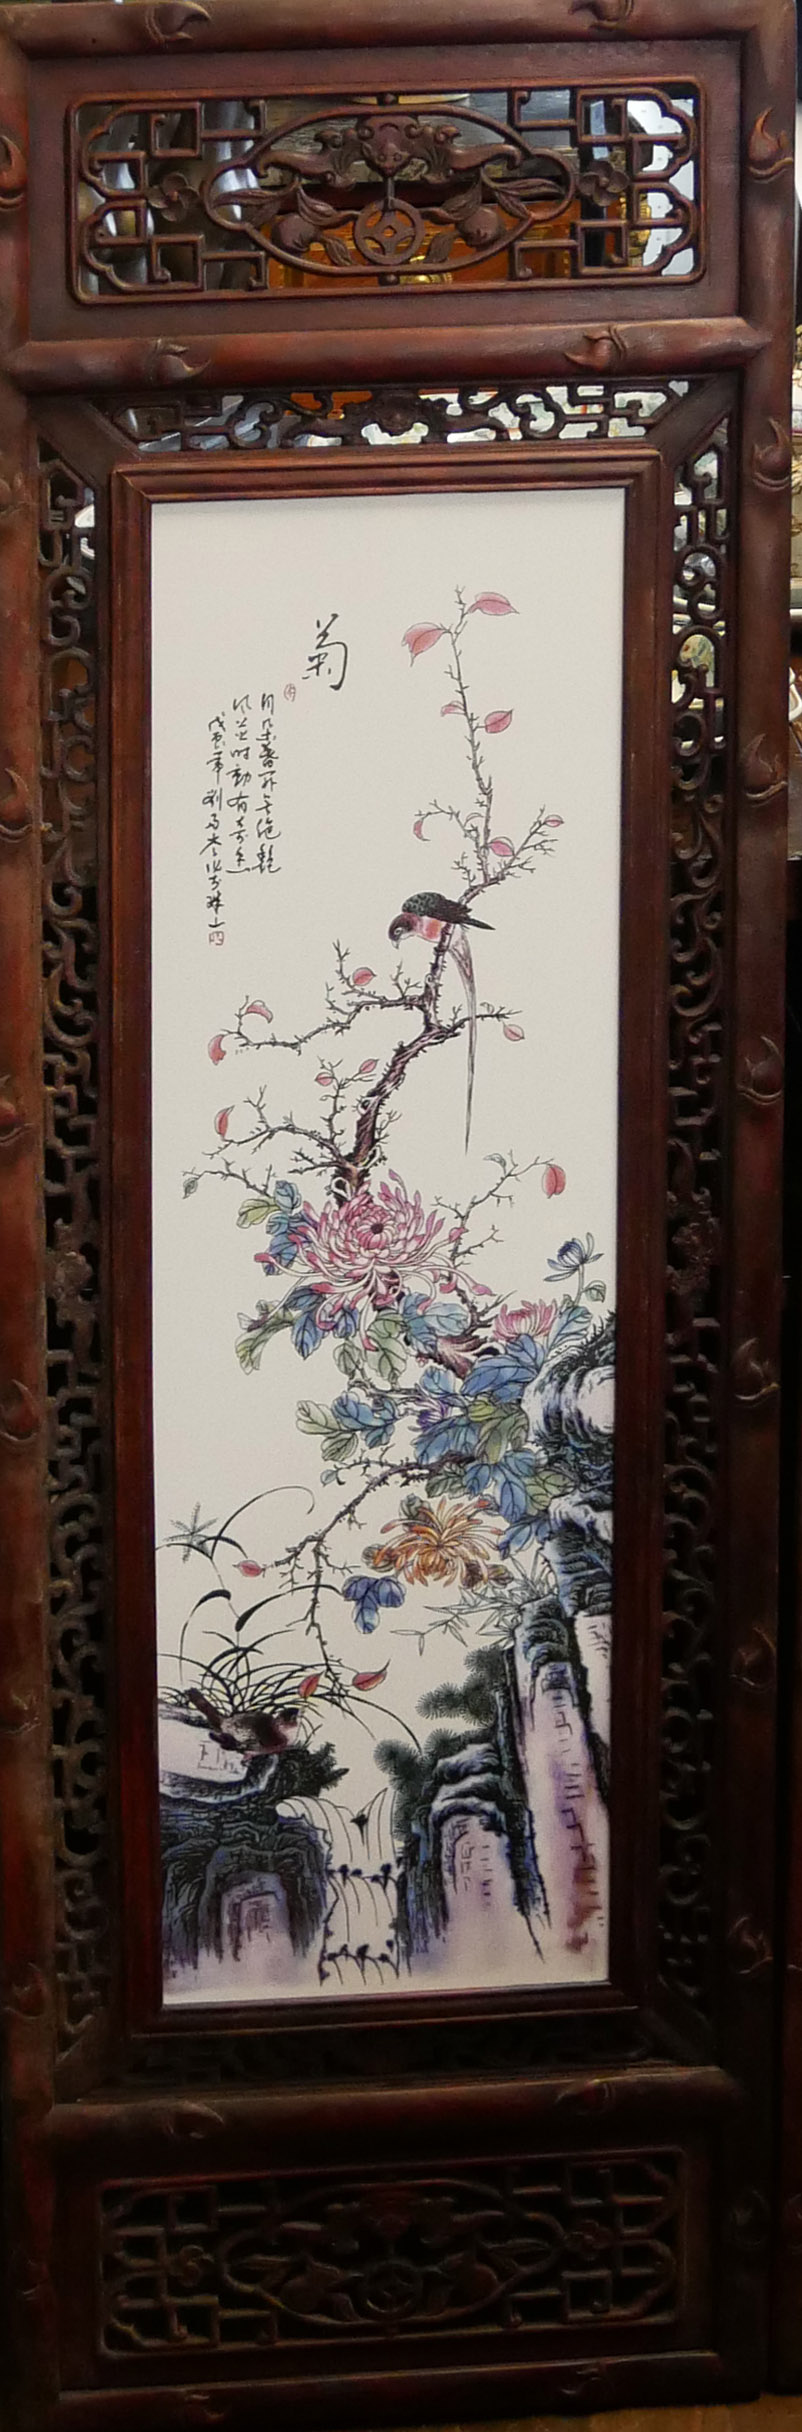 A SET OF FOUR CHINESE PORCELAIN PLAQUES Decorated with birds amongst flora, in a decorative - Image 3 of 3